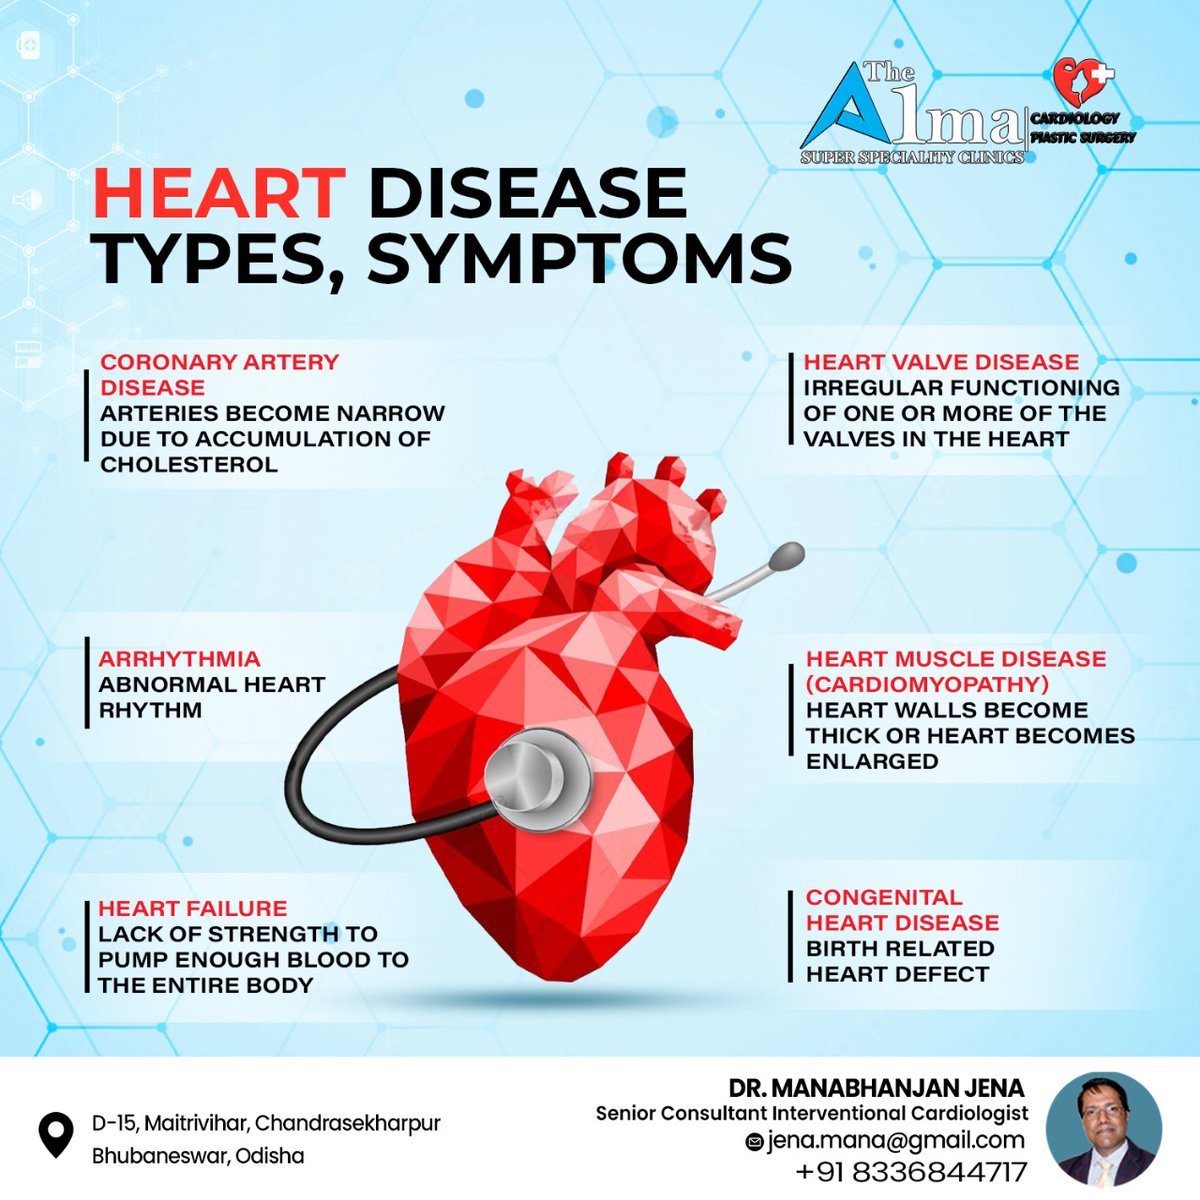 No one understands heartbeats better than a cardiologist. Do you think you have fast or slow heartbeats? Book an appointment @ 8336844717 for expert consultation with renowned cardiologist Dr. Manabhanjan Jena.
#worldheartday #heart #hearthealth #heartday #health #healthyheart